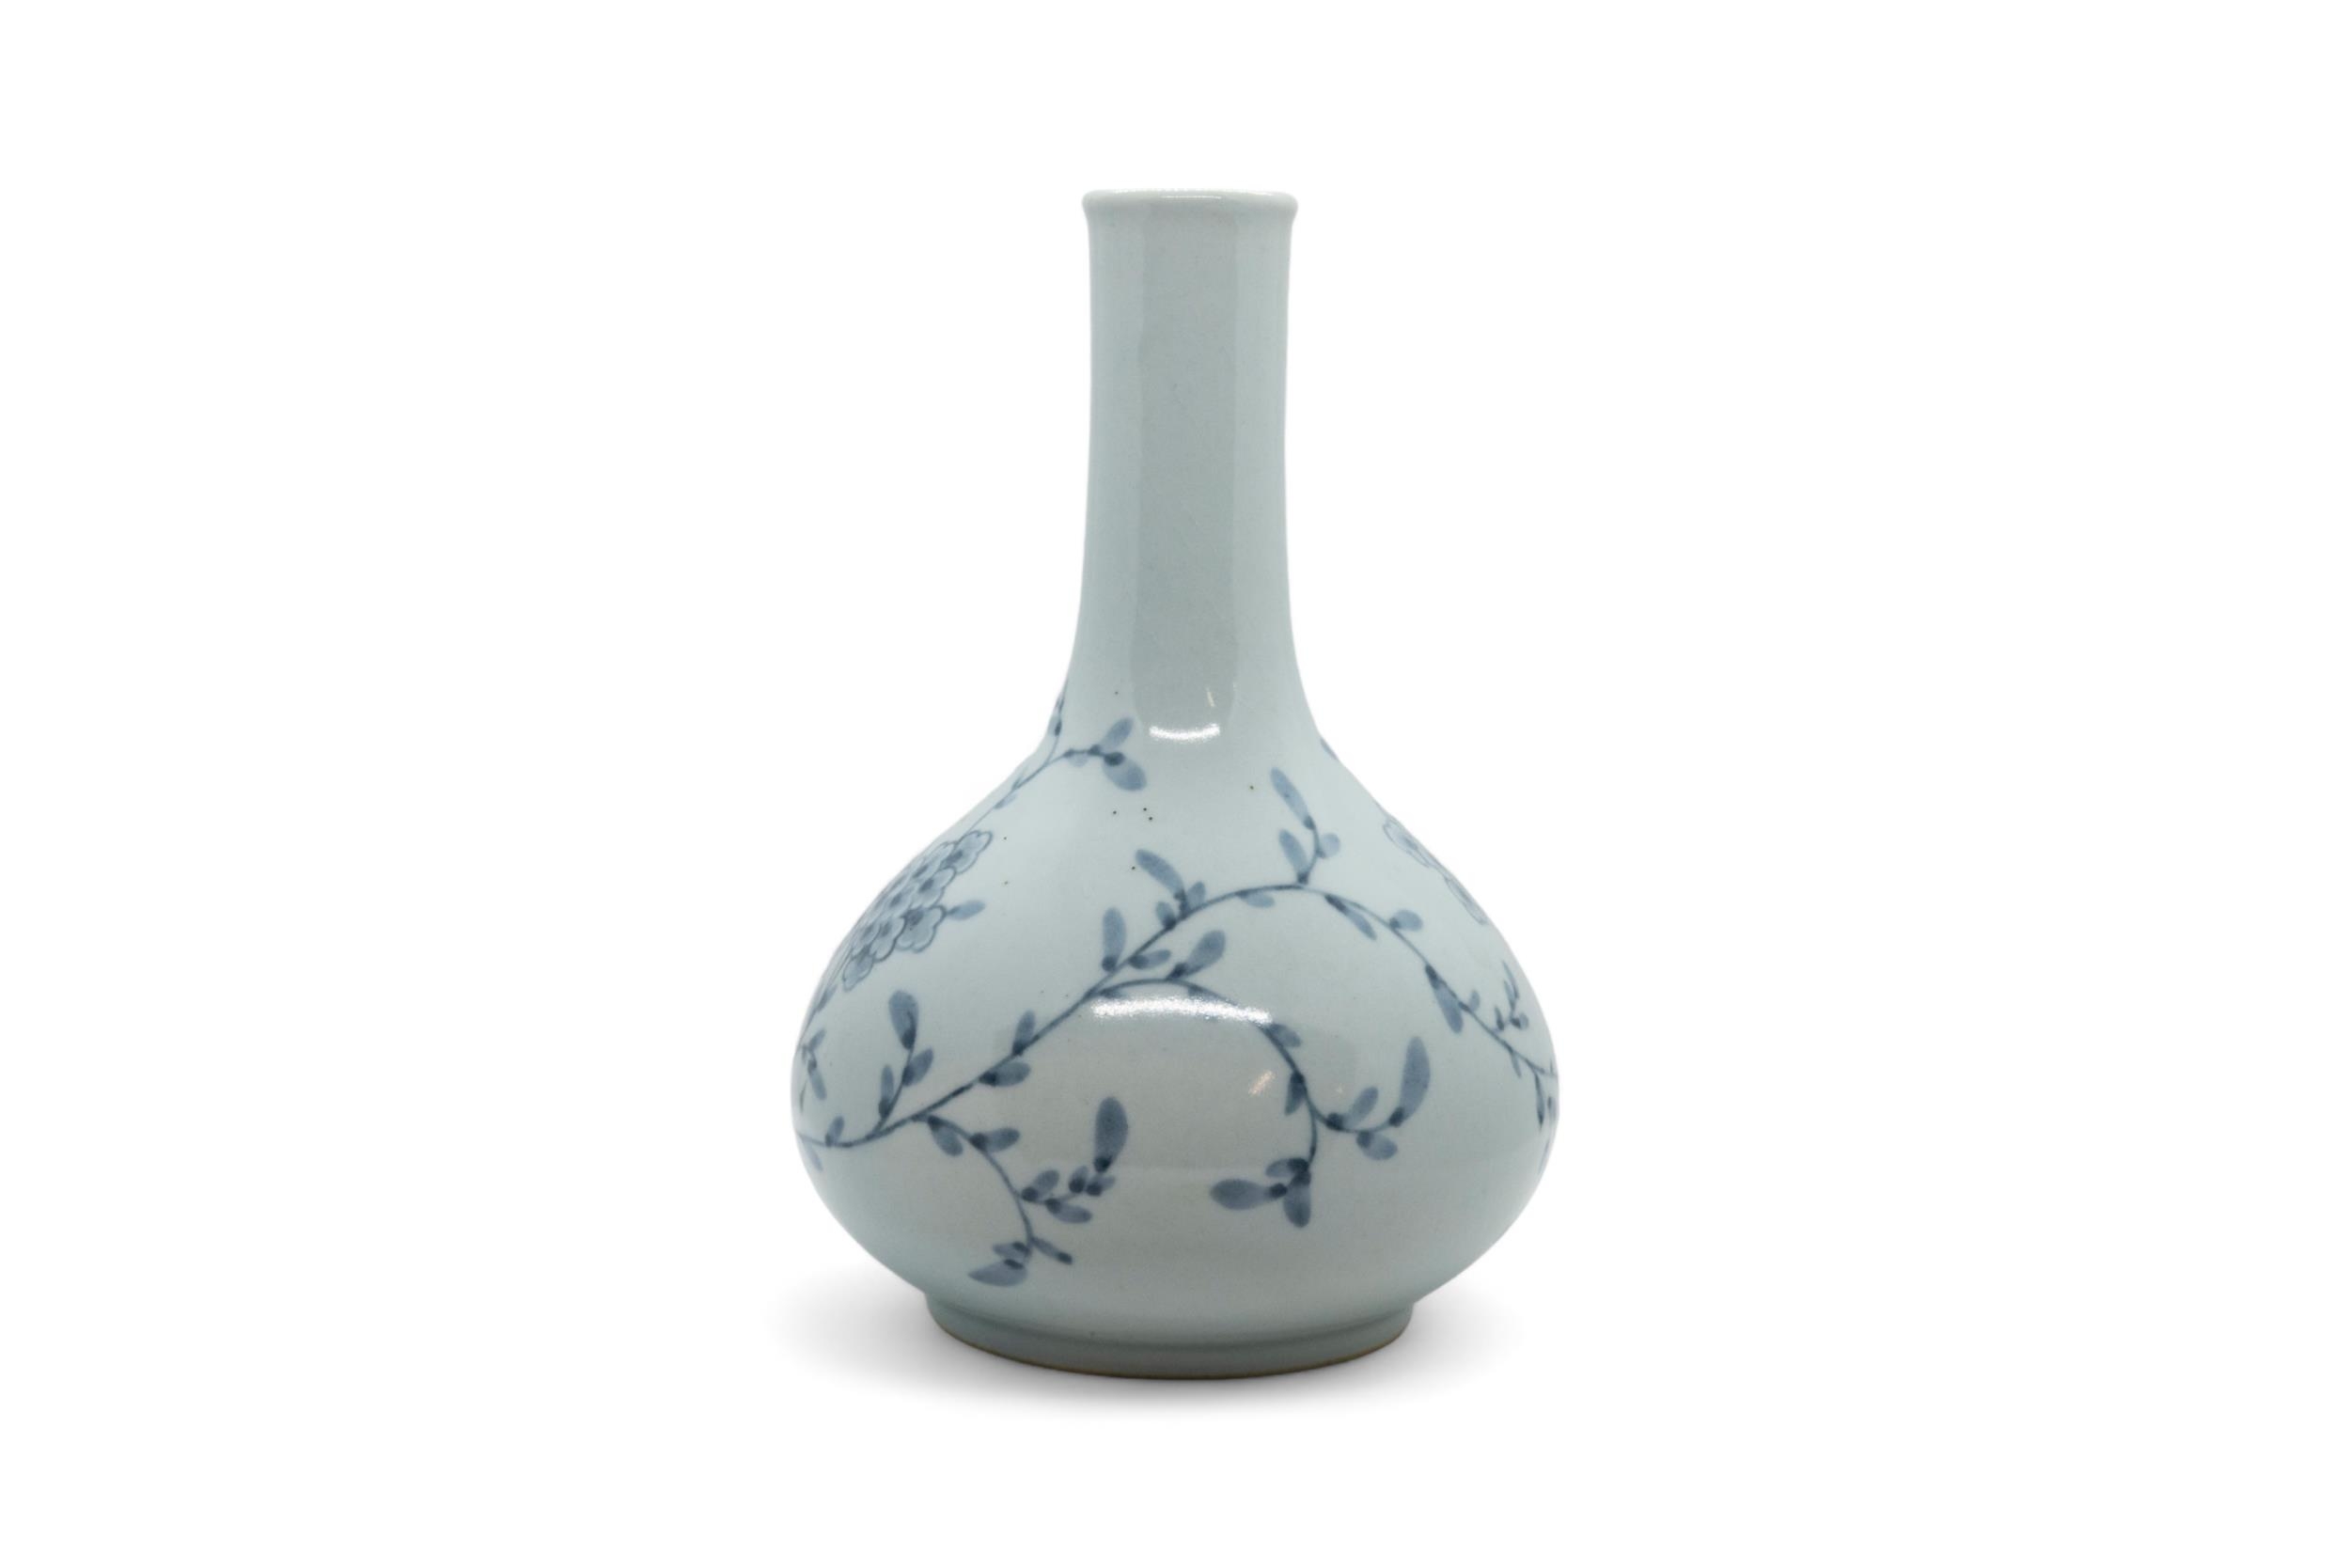 A GROUP OF FIVE JAPANESE PORCELAIN VASES 19TH / 20TH CENTURY largest, 46cm high, smallest, 24cm - Image 2 of 9